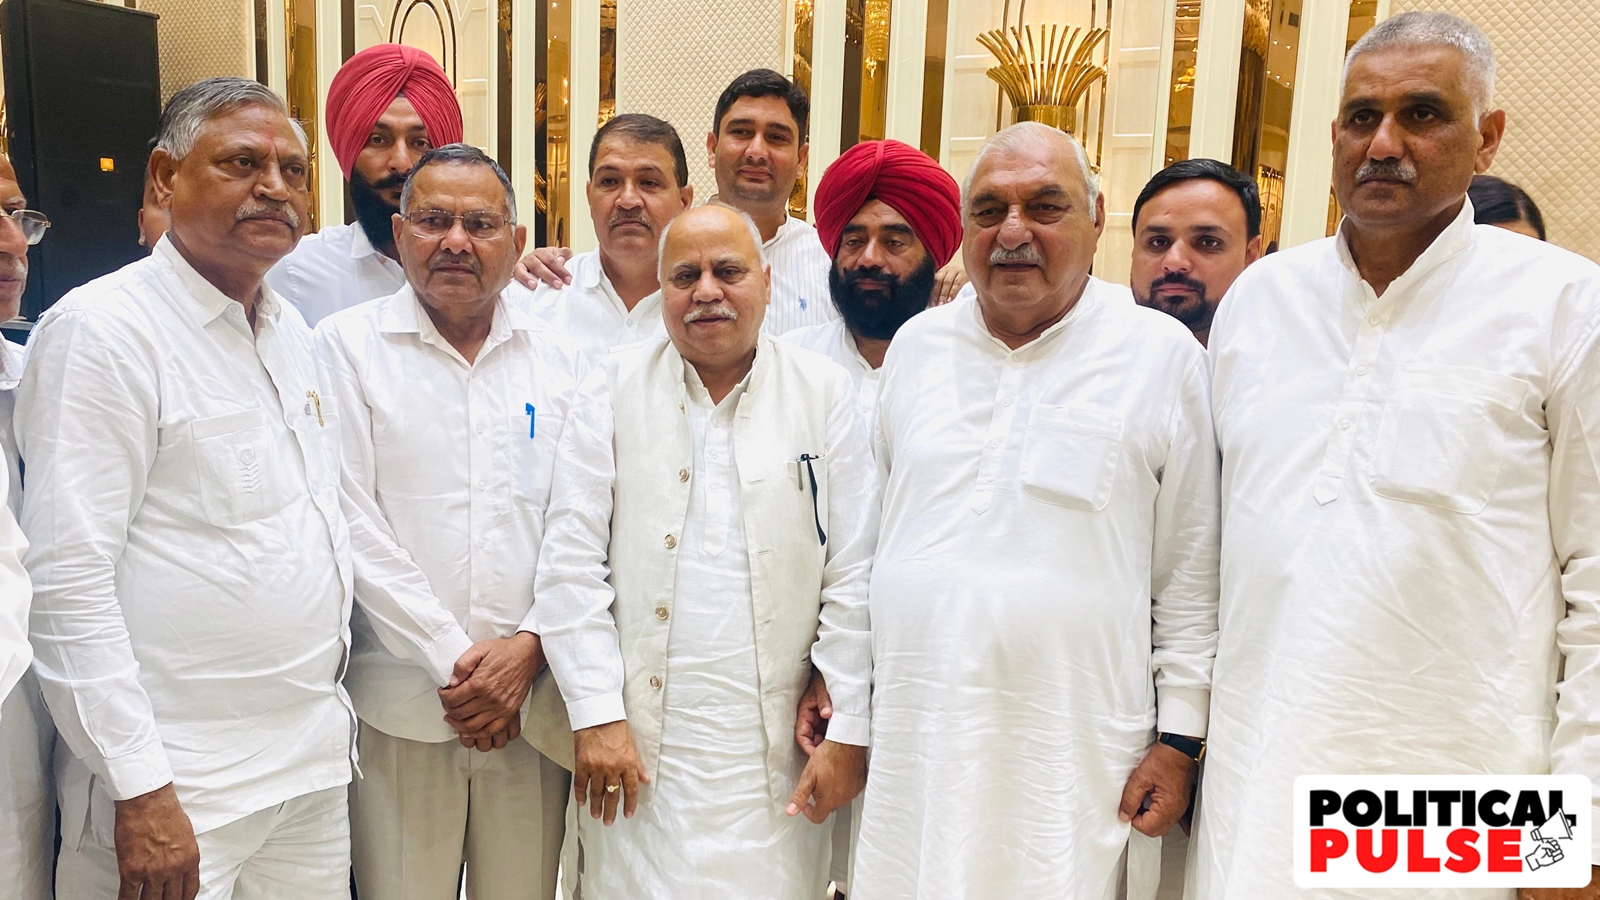 In a House with an effective strength of 88, the party has 40 MLAs. It claims support of 7 other MLAs still, putting it just past the majority mark of 45